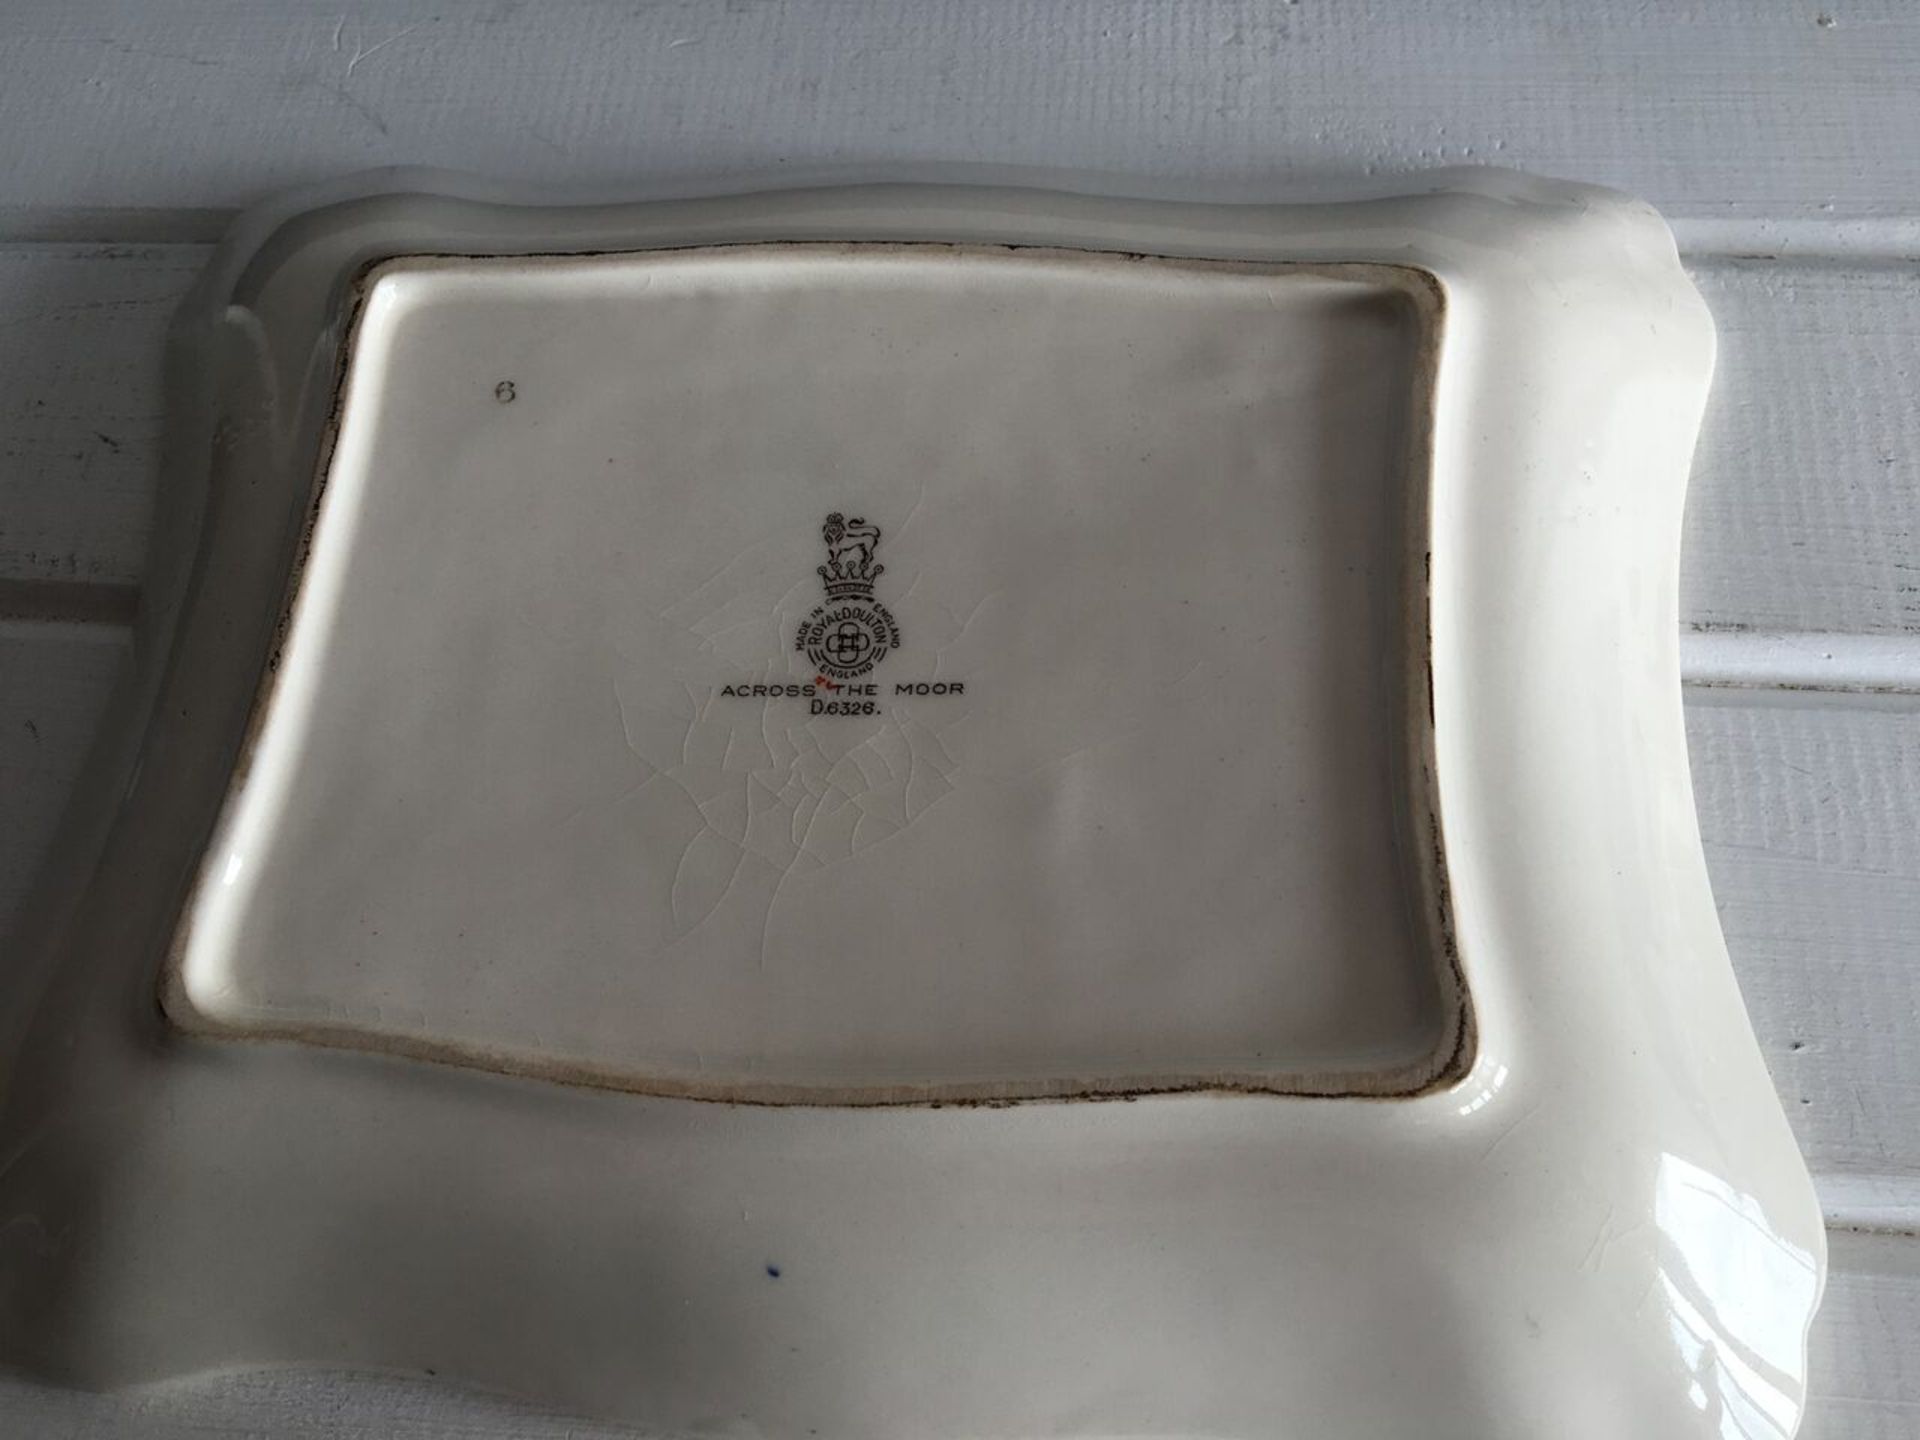 RARE ROYAL DOULTON SERIES WARE DISH "ACROSS THE MOOR" D6326, CHARLES SIMPSON. PRINTED MARKS TO BASE. - Image 3 of 3